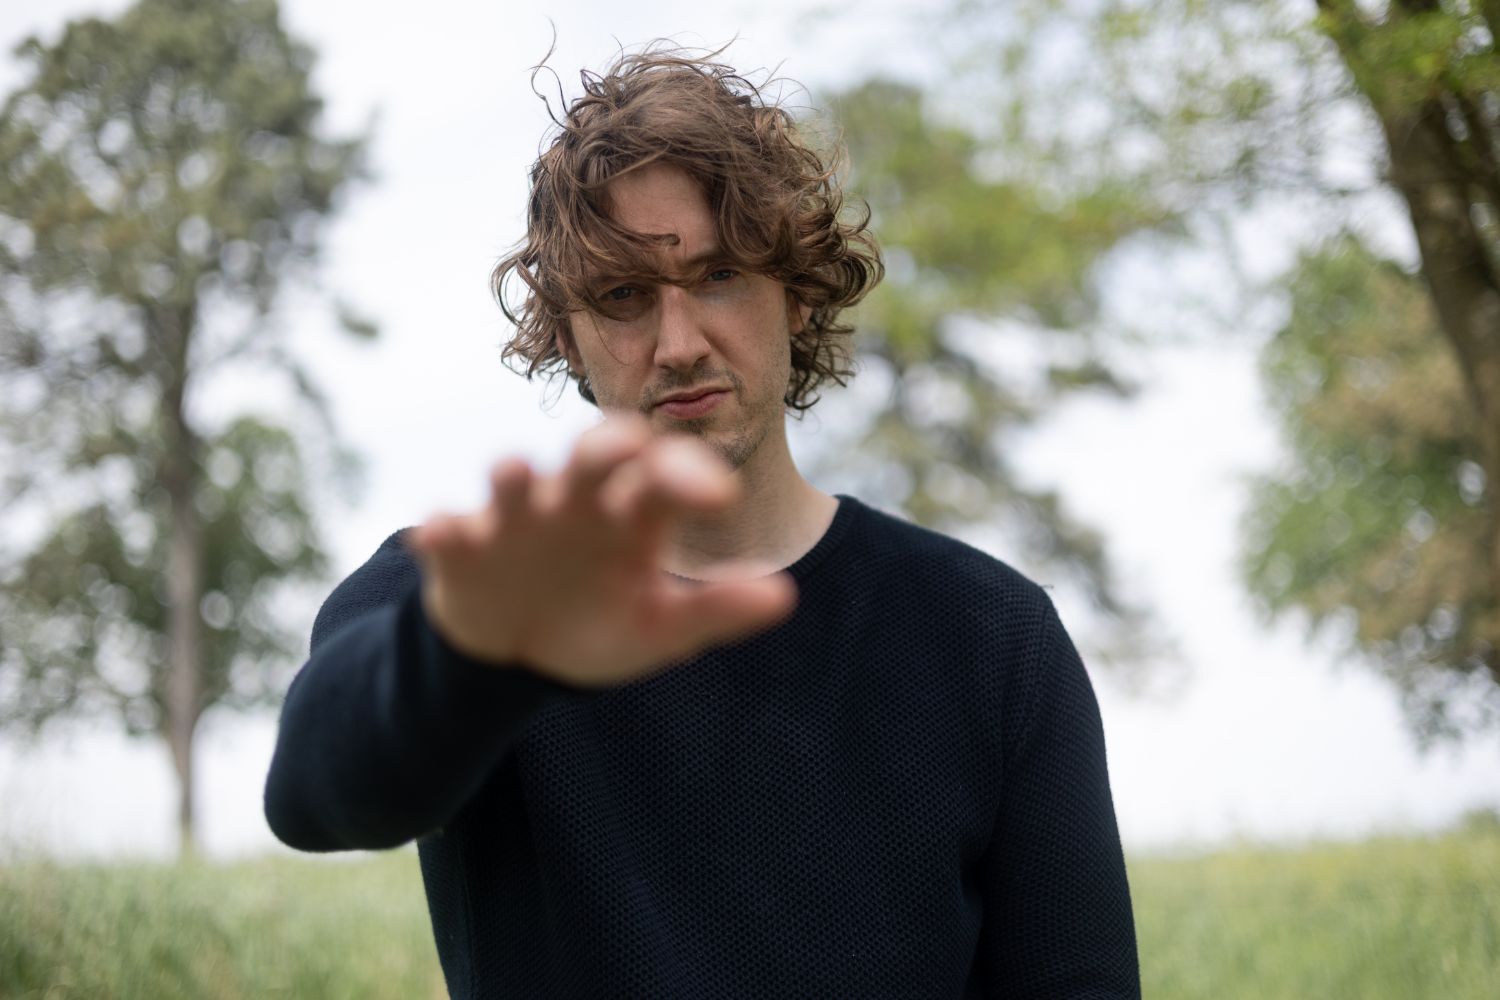 Dean Lewis releases new album and announces tour for 2023